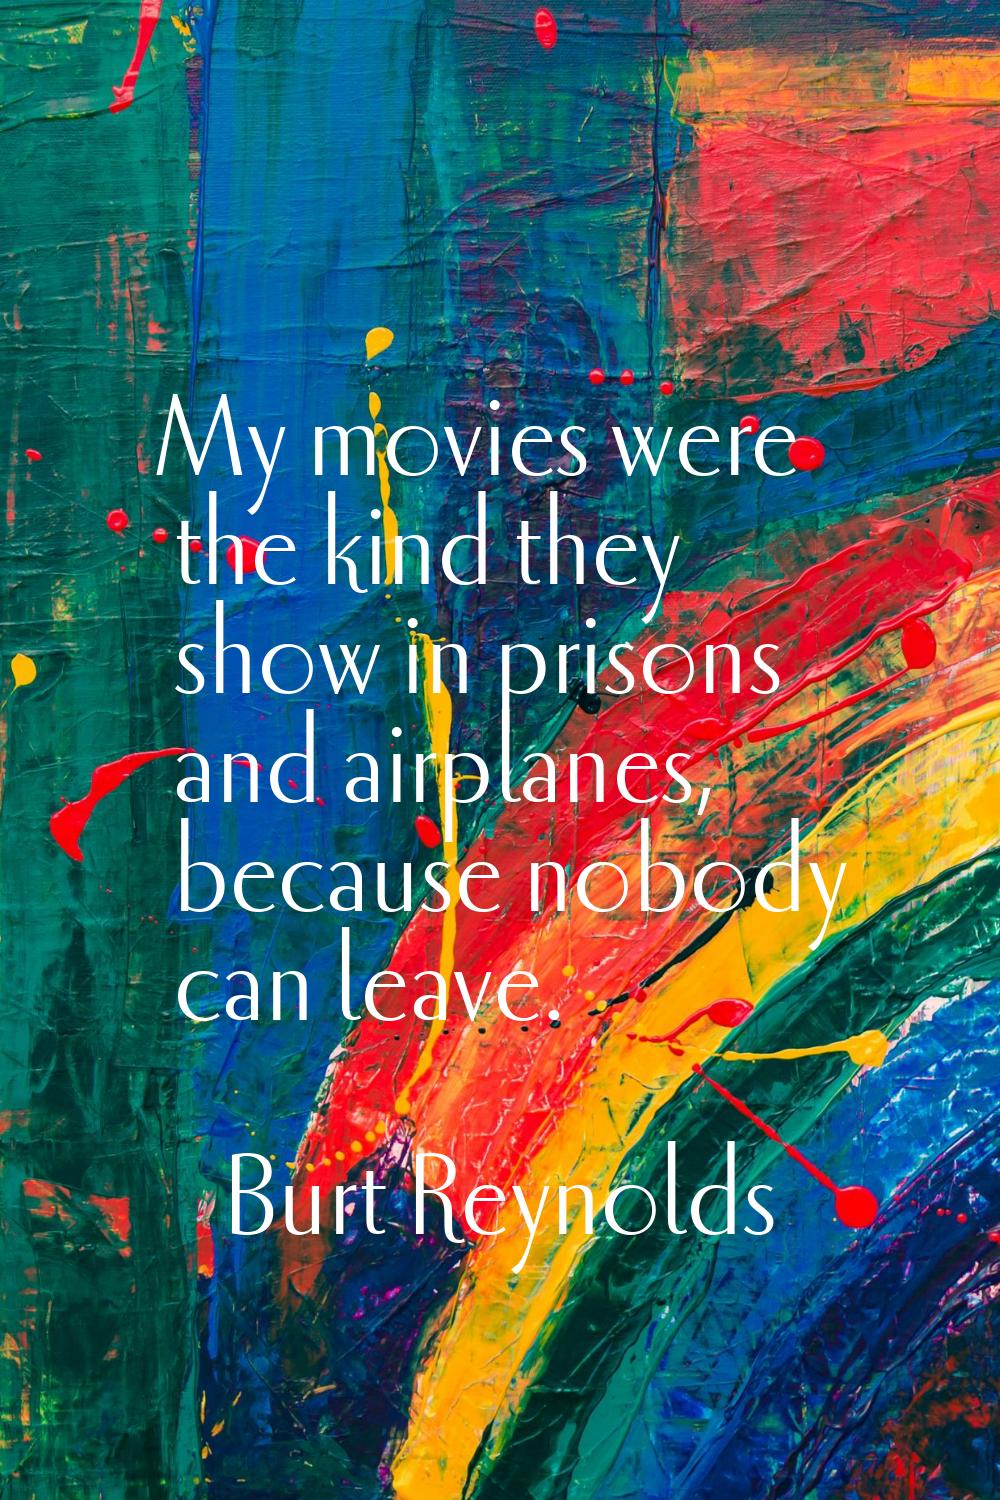 My movies were the kind they show in prisons and airplanes, because nobody can leave.